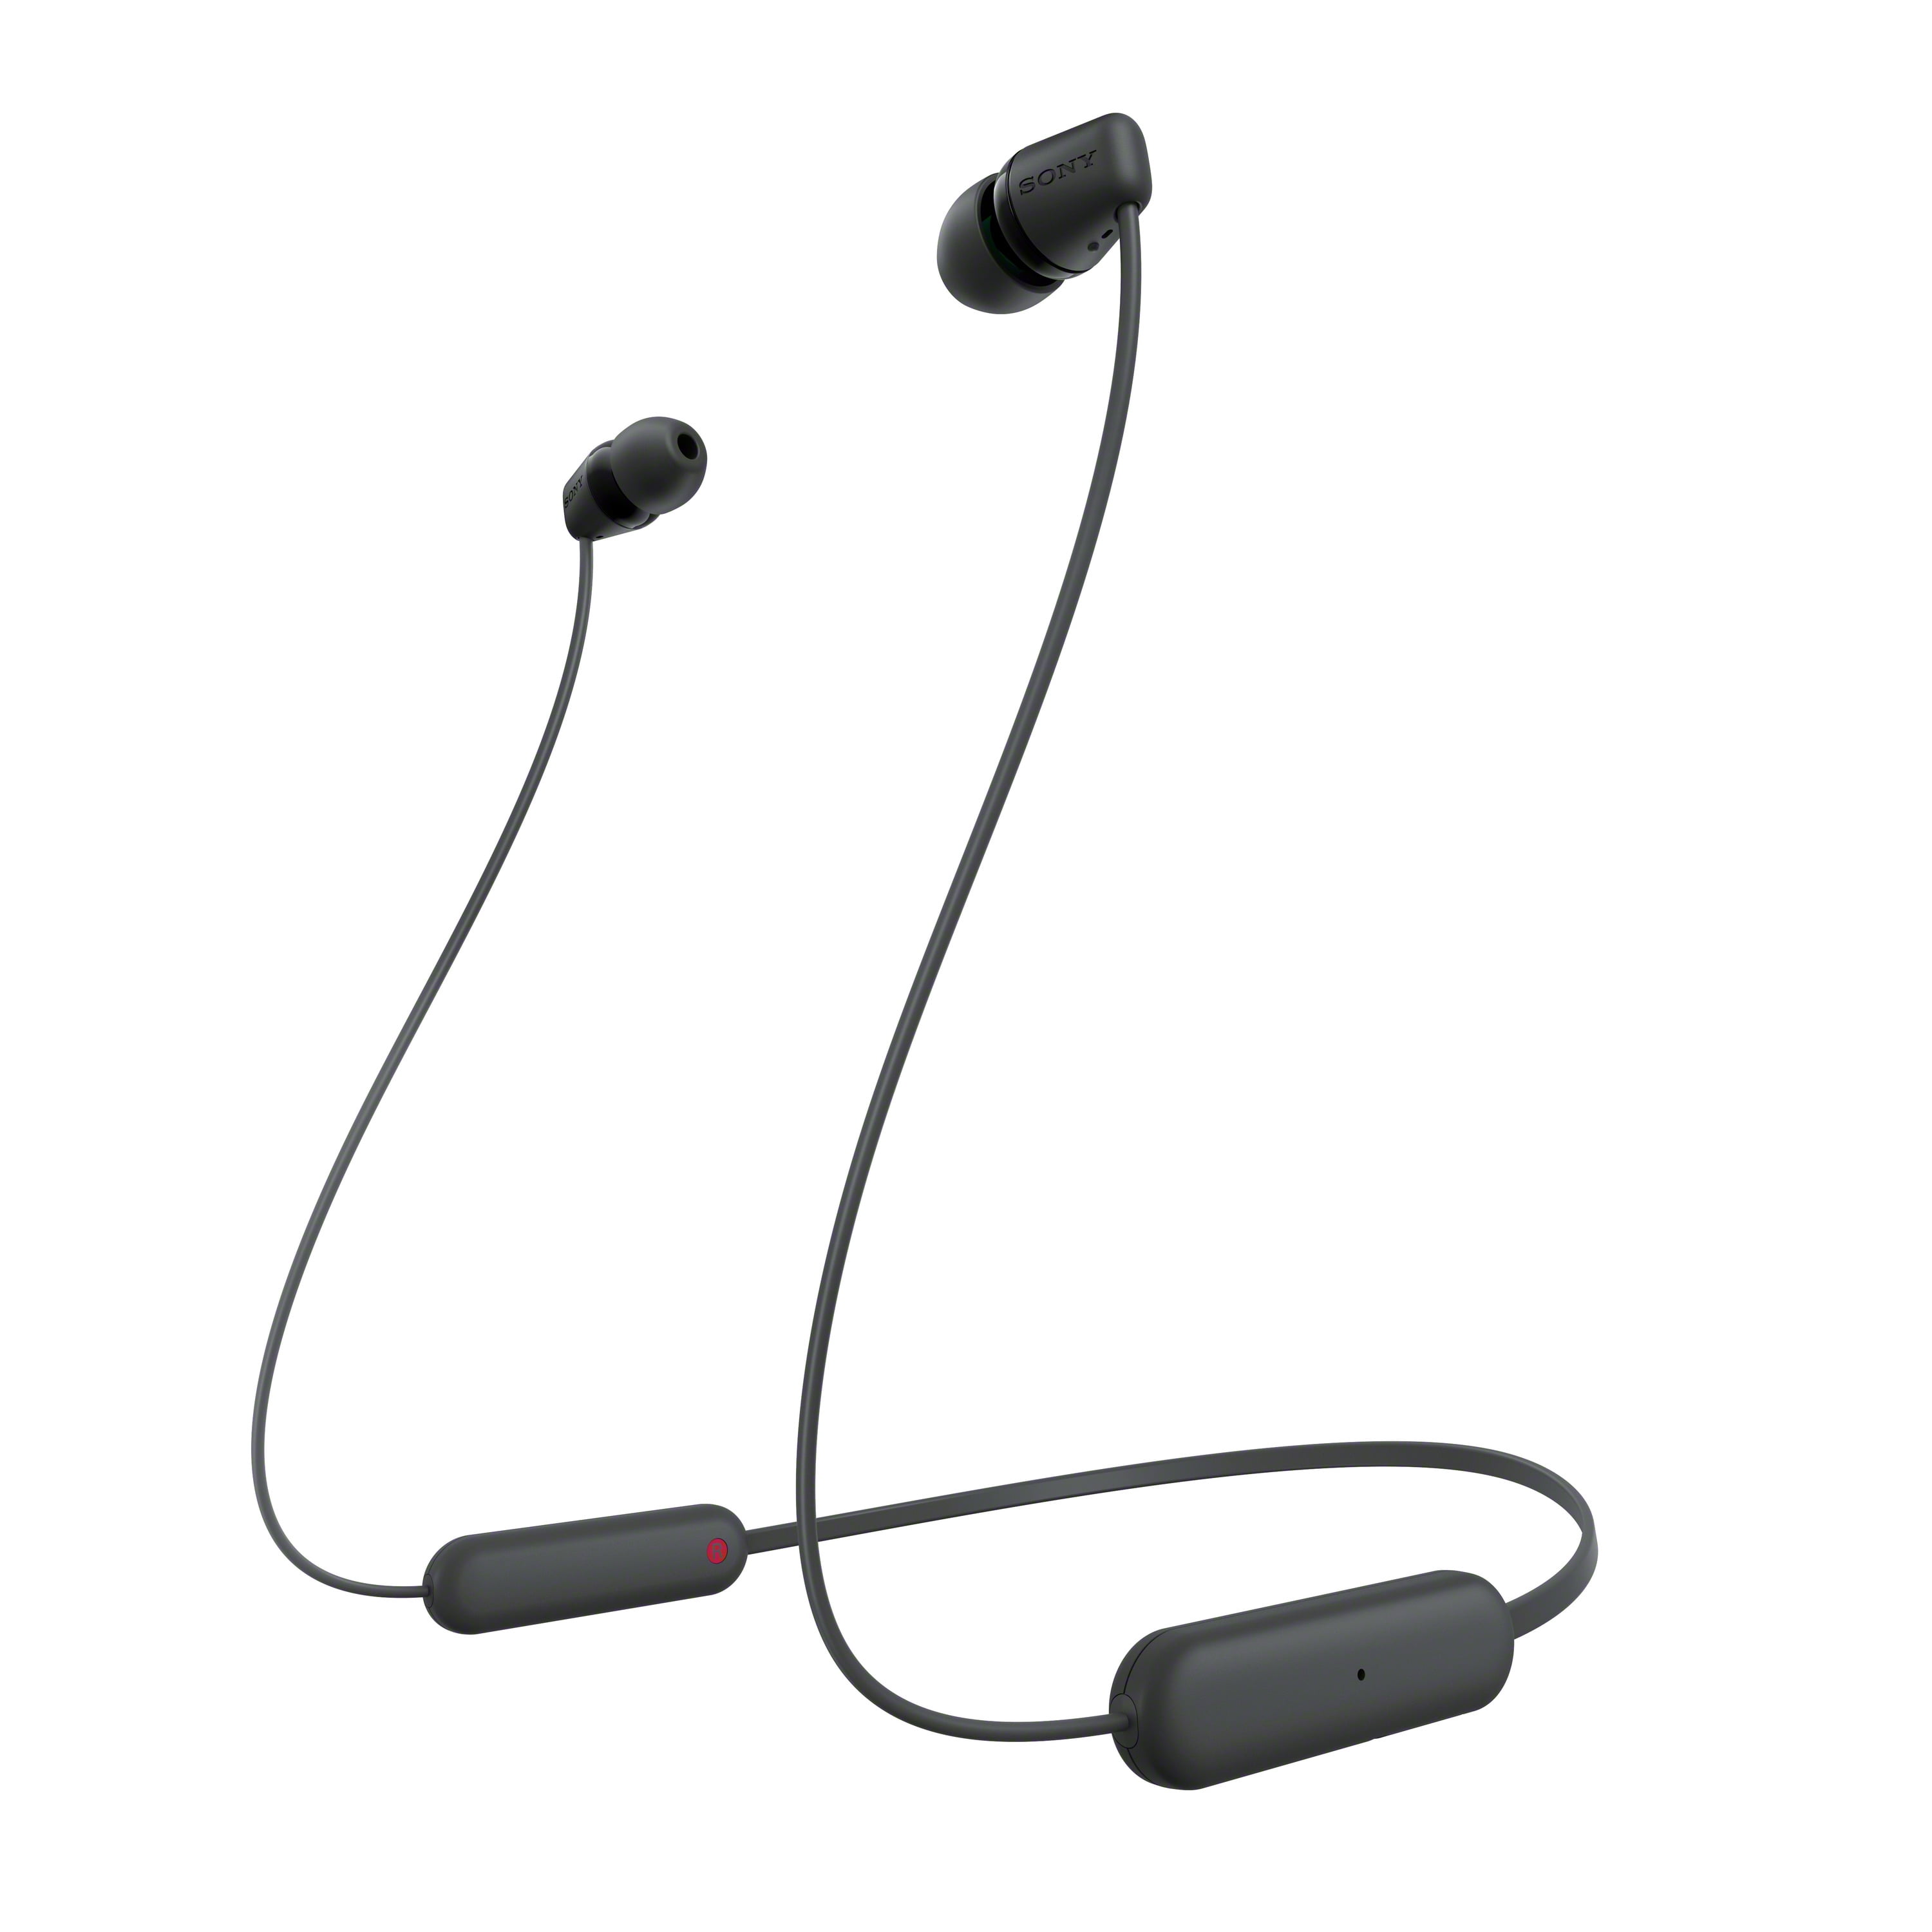 Sony WI-C100 Wireless In-ear Bluetooth Headphones with built-in microphone, Black